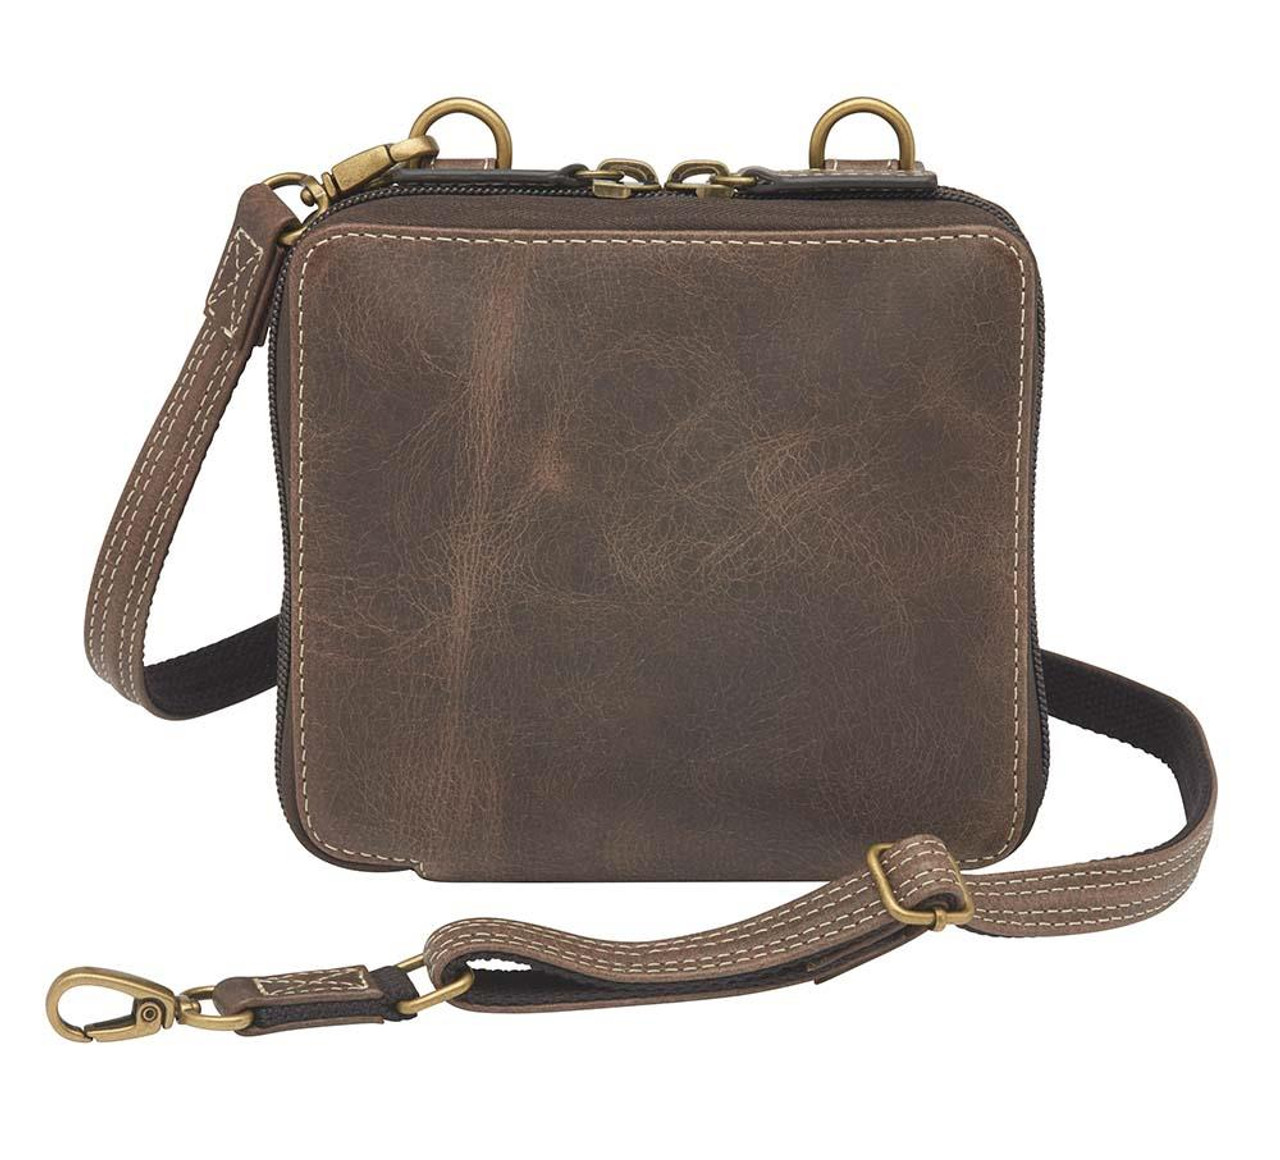 Gun Tote'n Mamas Concealed Carry Raven Cross-Body Bag  $1.00 Off 4.5 Star  Rating w/ Free Shipping and Handling